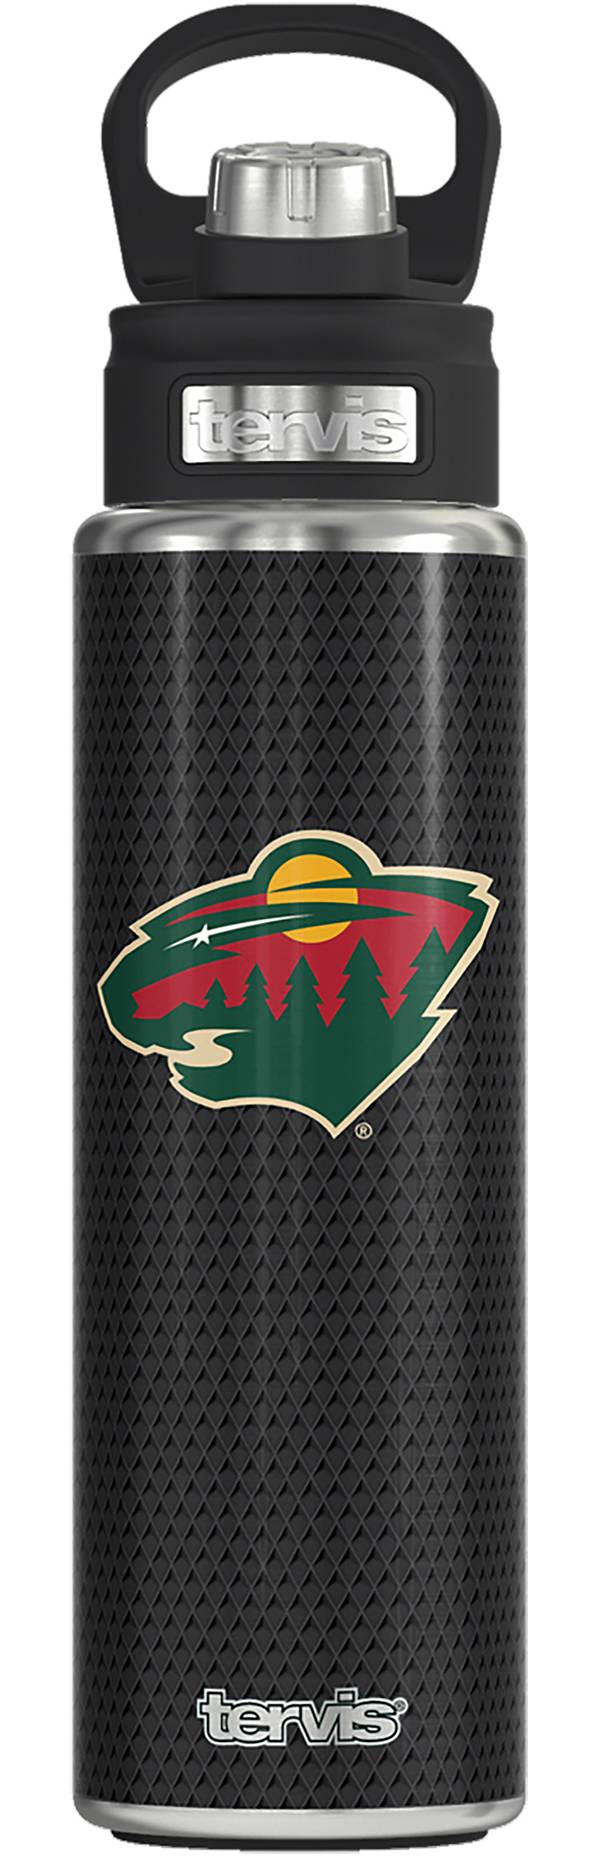 Tervis Minnesota Wild Puck 24oz. Stainless Steel Tumbler product image